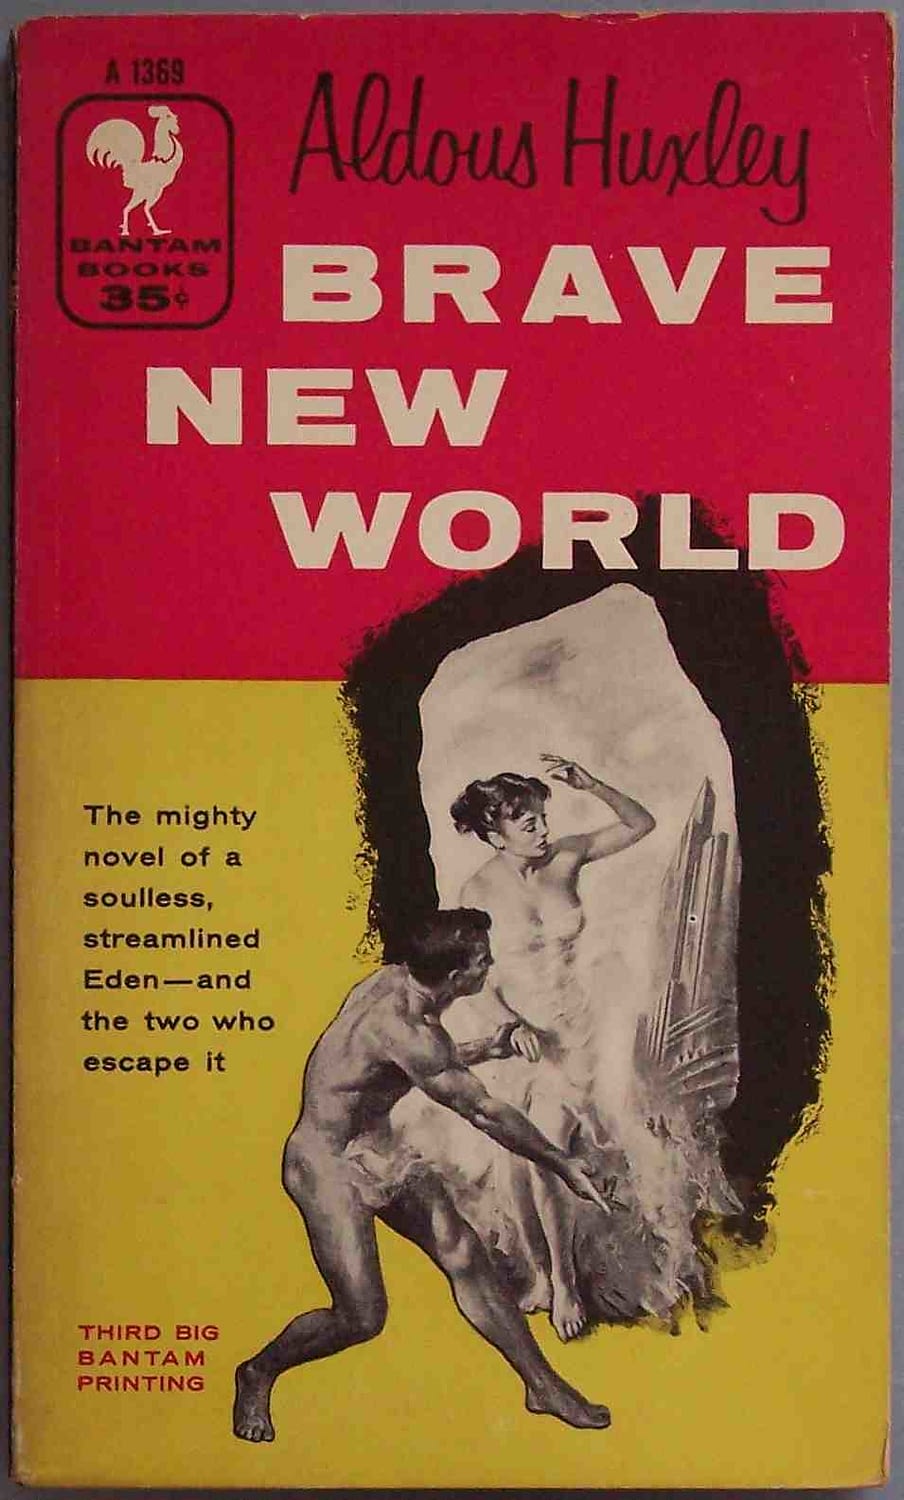 brave new world book covers